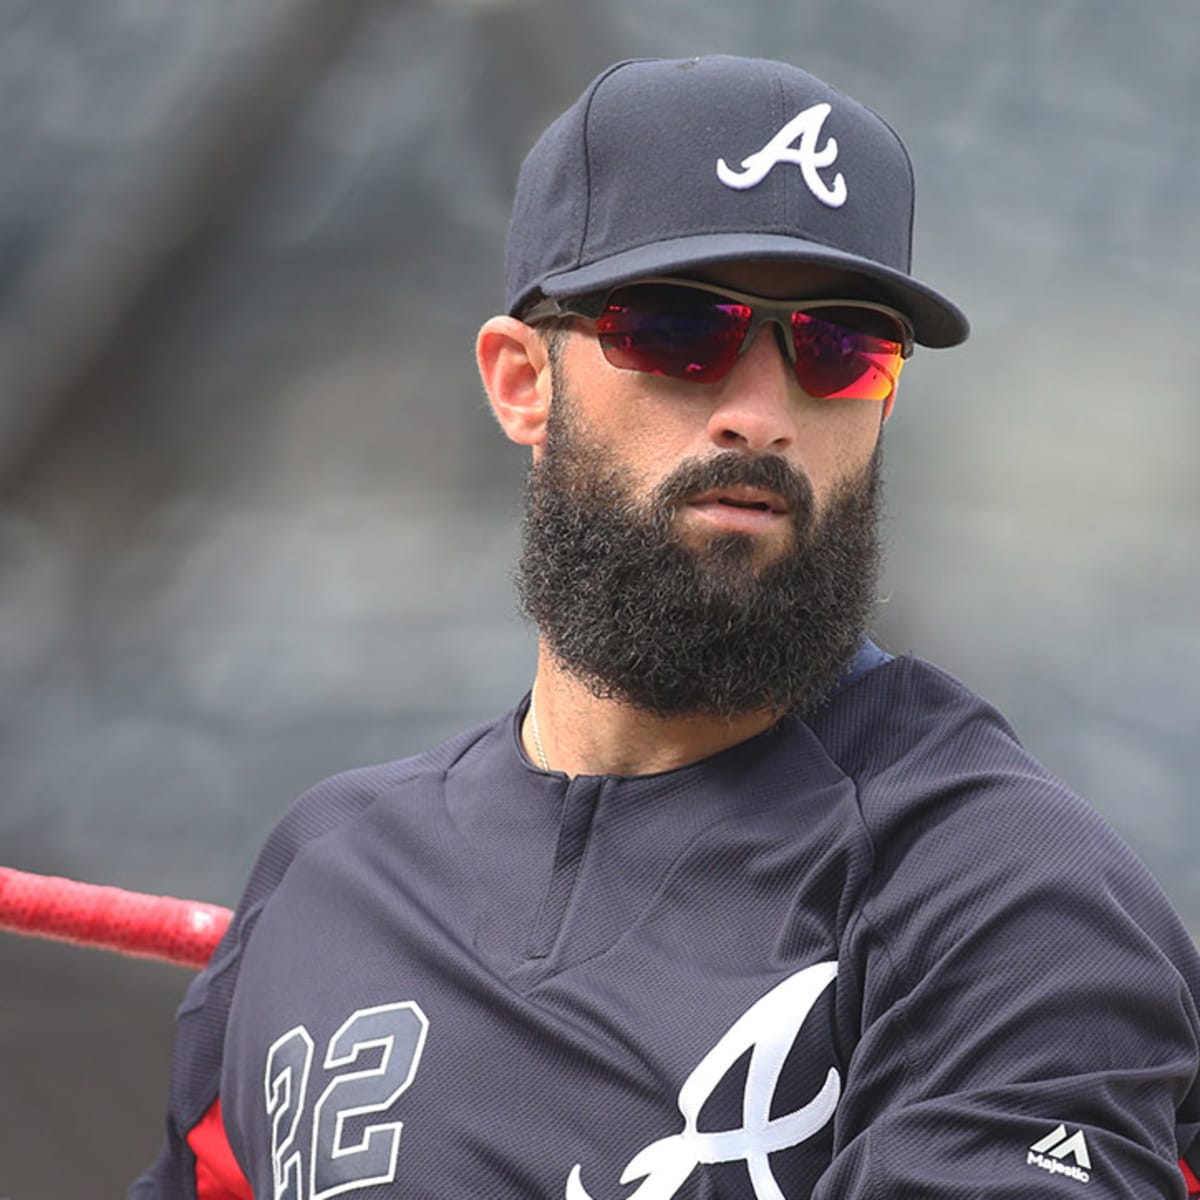 Braves' Markakis on Astros: 'Every single guy over there needs a